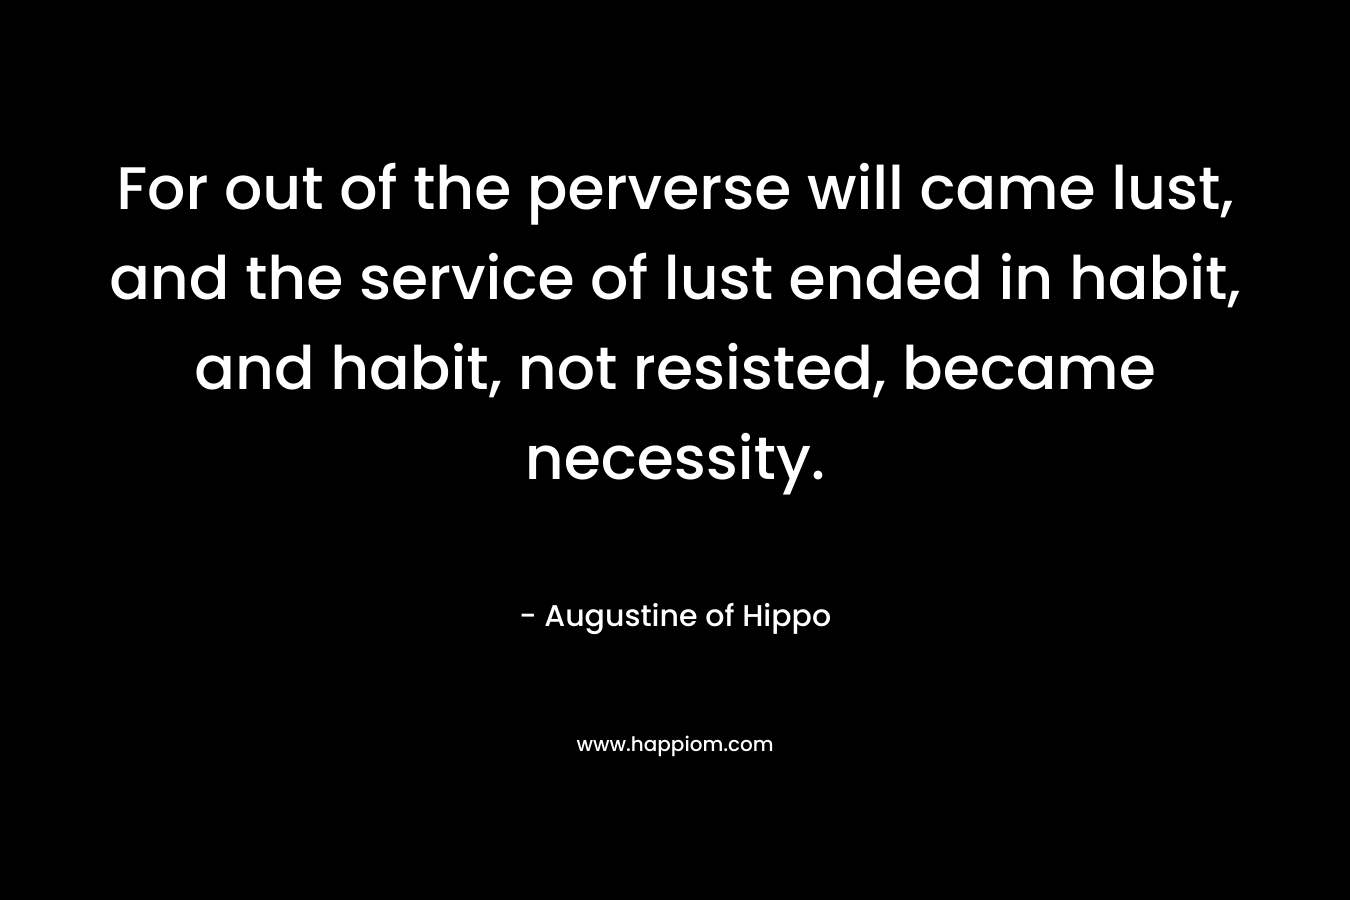 For out of the perverse will came lust, and the service of lust ended in habit, and habit, not resisted, became necessity. – Augustine of Hippo